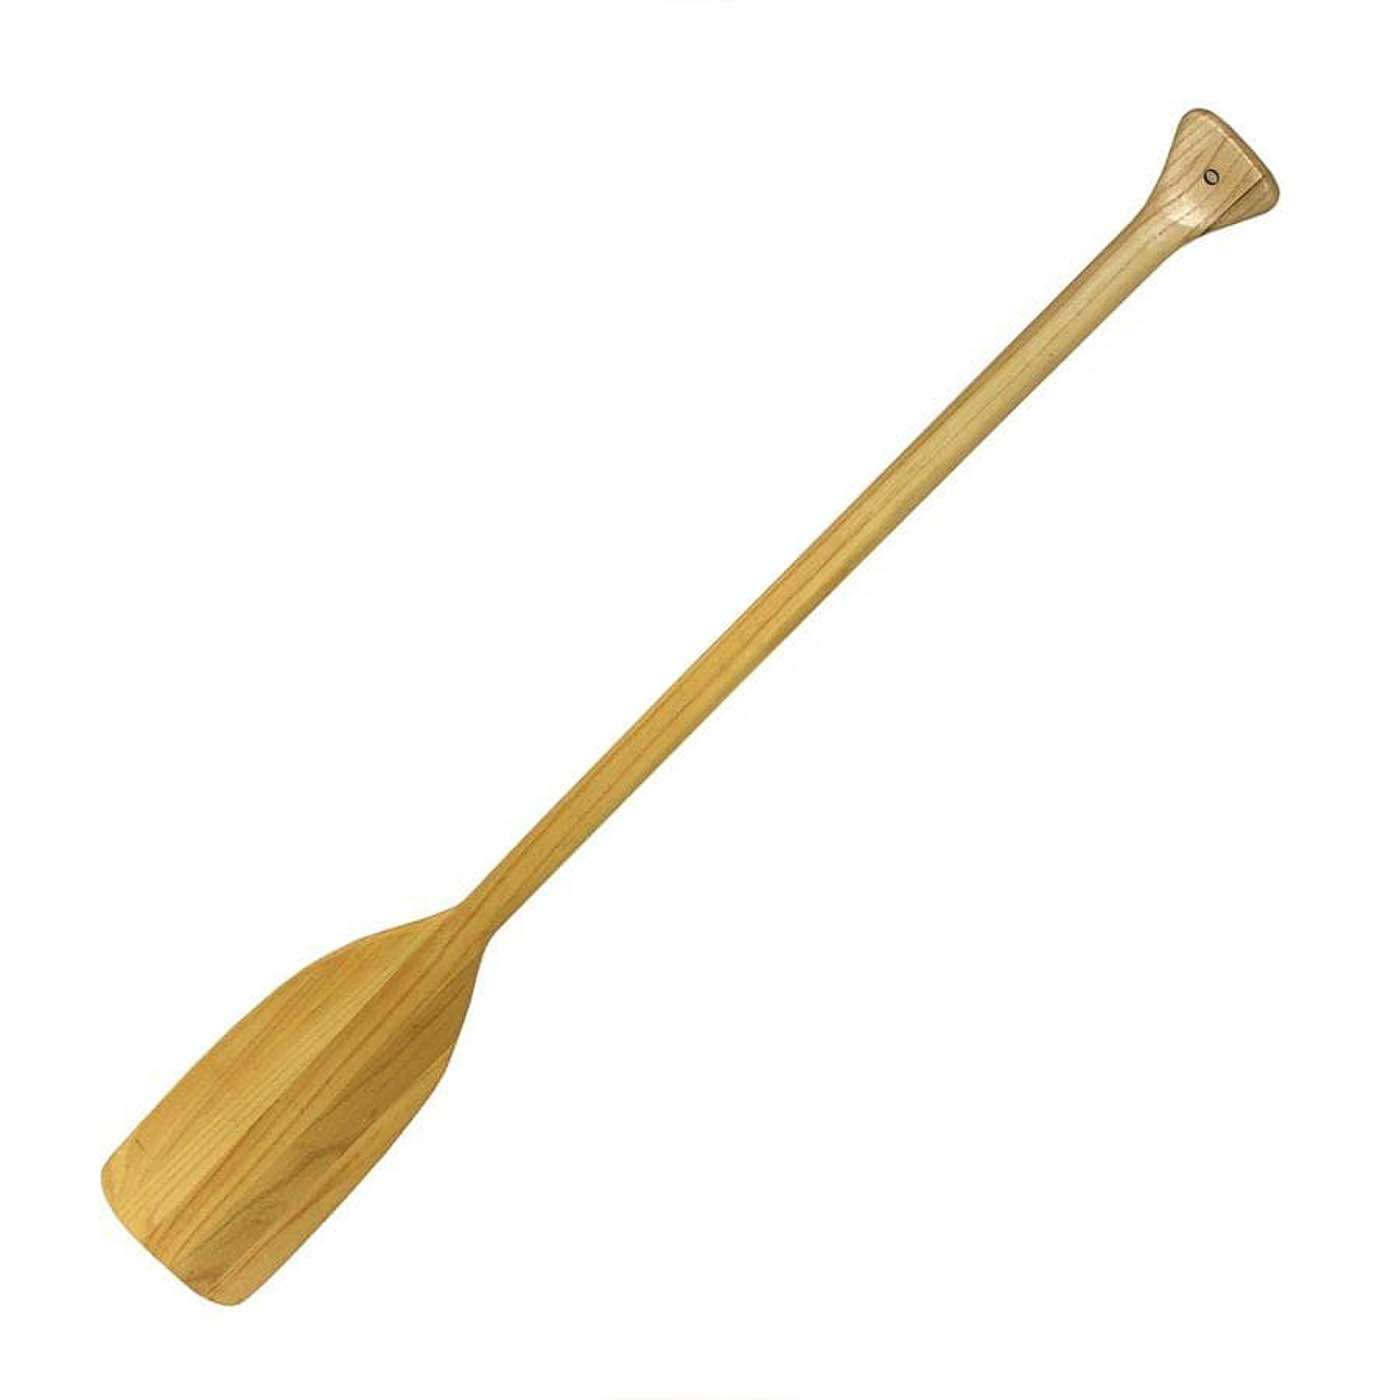 <p><strong>T-H Marine Wood Canoe Paddle</strong></p><p>T-H Marine is making it easier than ever to get basic boating products at great prices, all through its BOATING ESSENTIALS product line. The 60